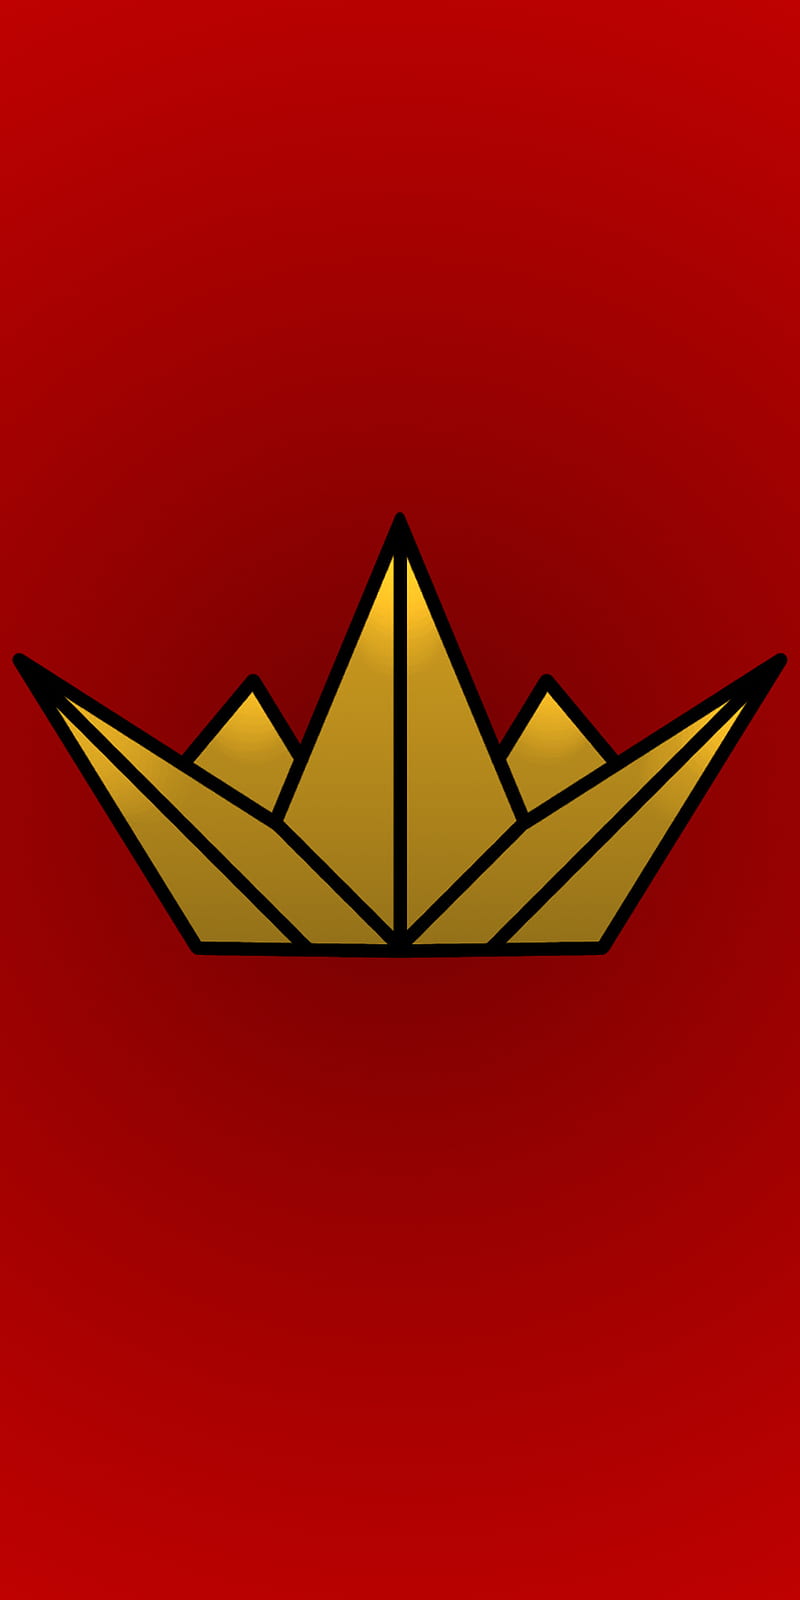 Golden logos king crown icons on square Royalty Free Vector